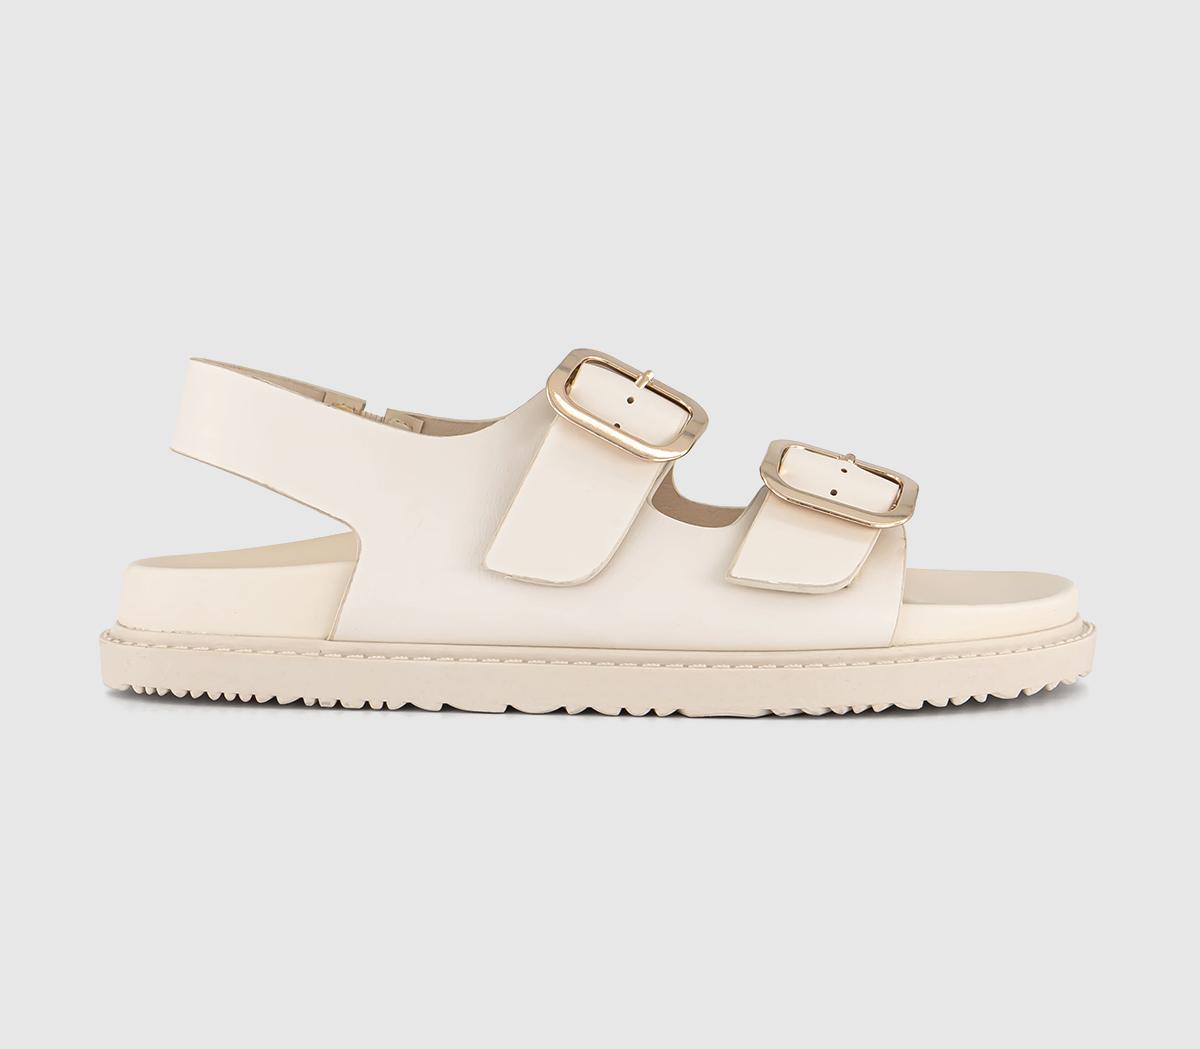 OFFICESunny Double Buckle Strap Slingback Footb SandalsedOff White